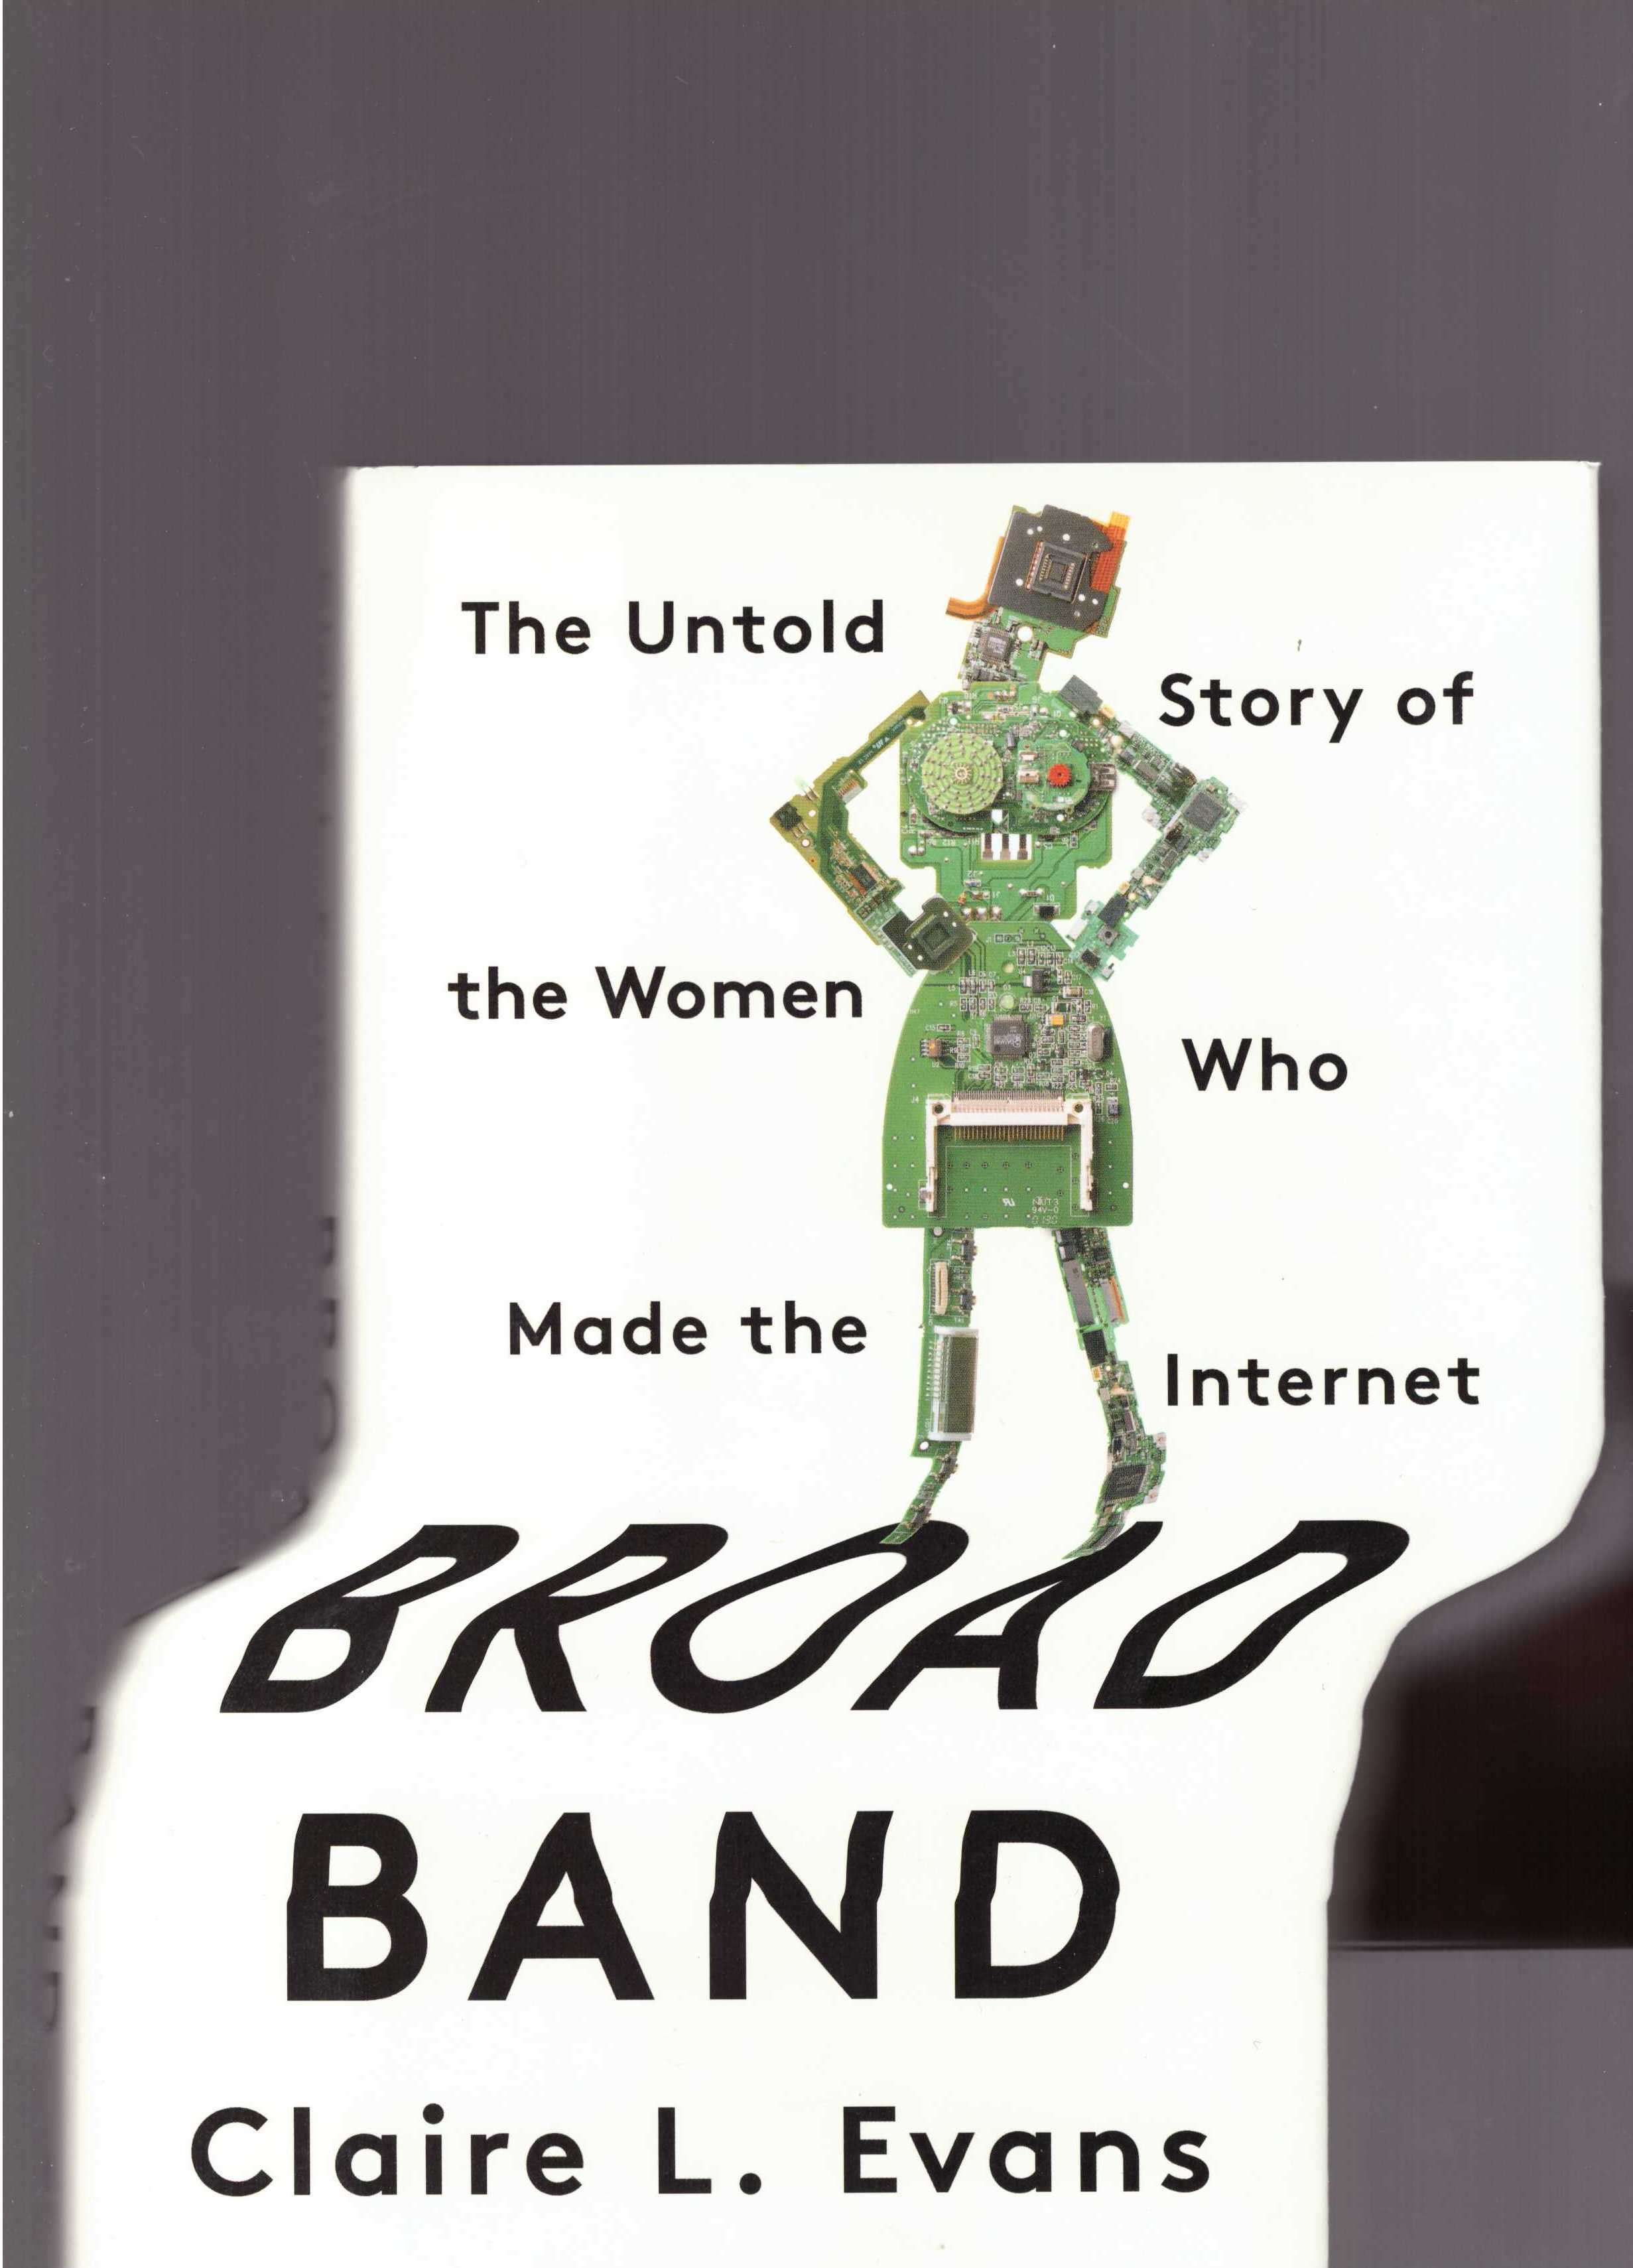 EVANS, Claire L.  - Broad Band. The Untold Story of the Women Who Made the Internet